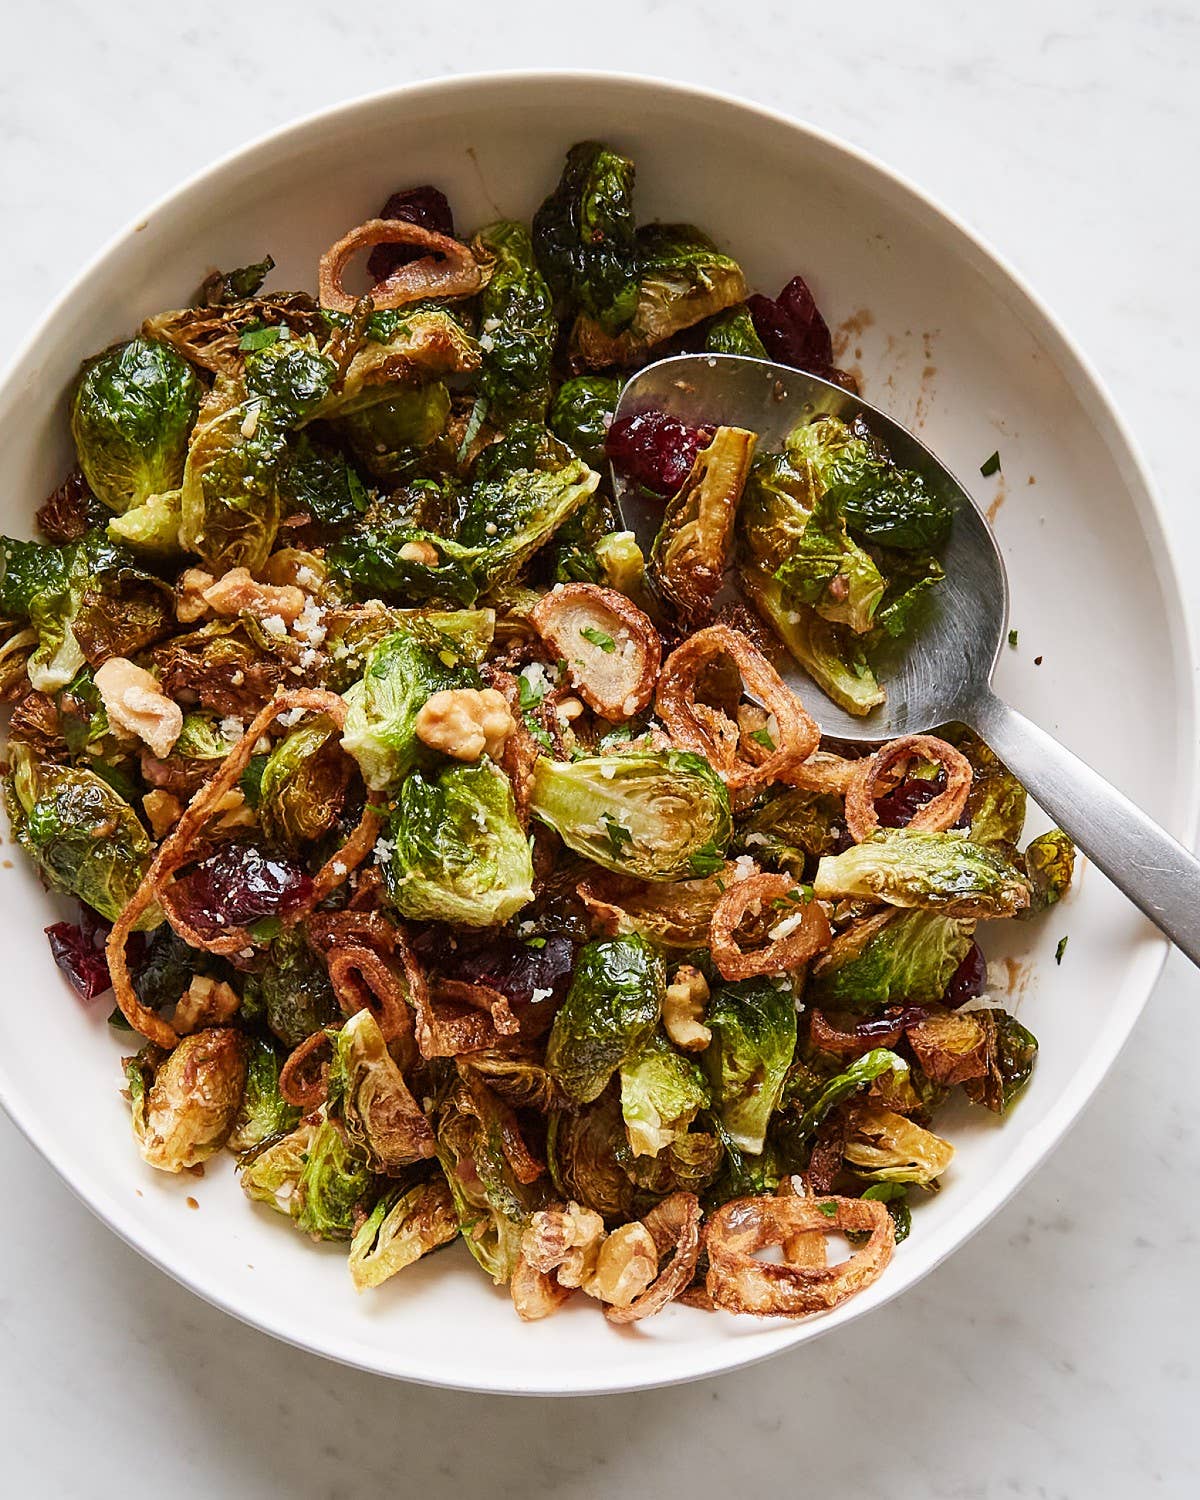 Fried Brussels Sprouts Recipe